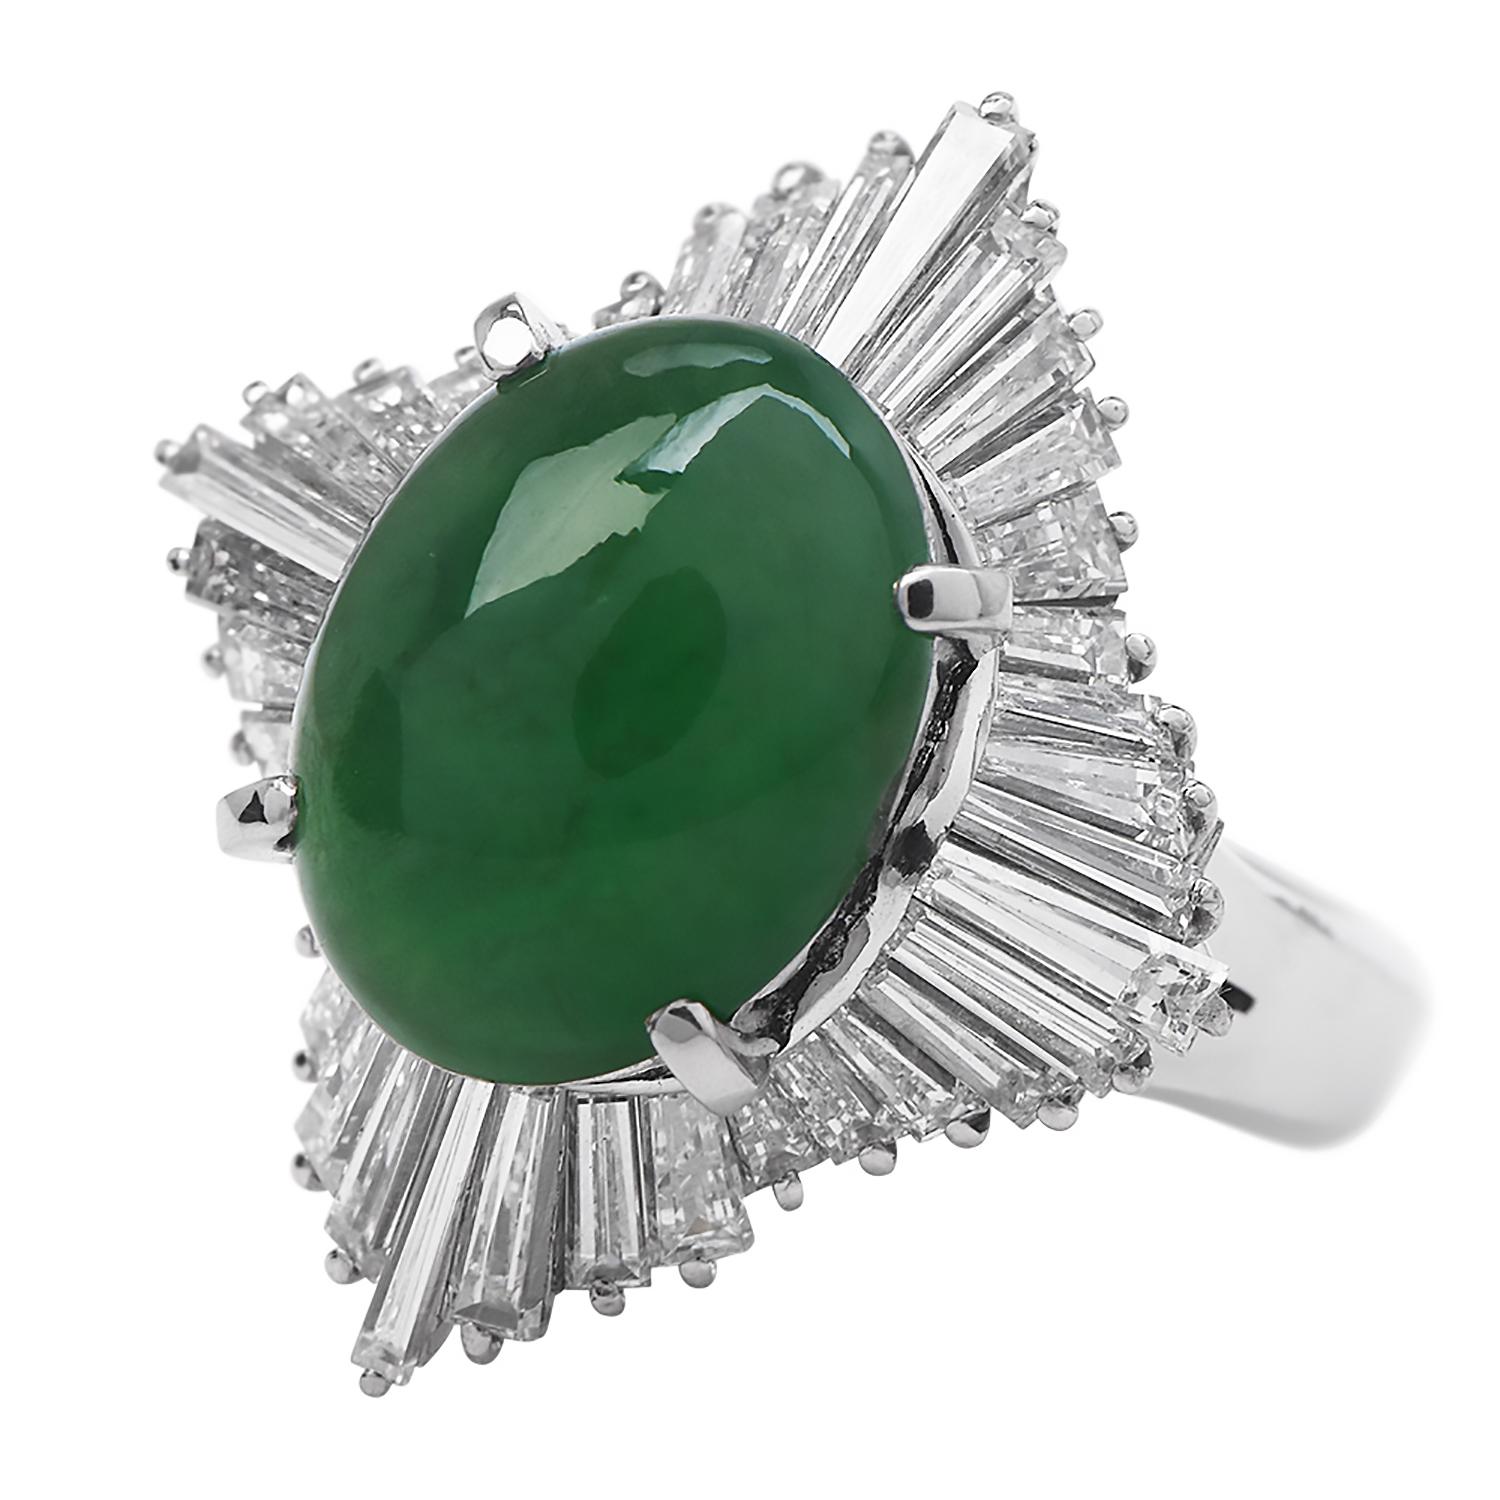 A halo of diamonds surrounds this Natural Color of Green Jade. 

They are crafted in solid Platinum,  Featuring in the center a Cabochon Oval Cut GIA Green Jade of 4.11 carats, natural color without any treatments.

The center stone measuring appx.